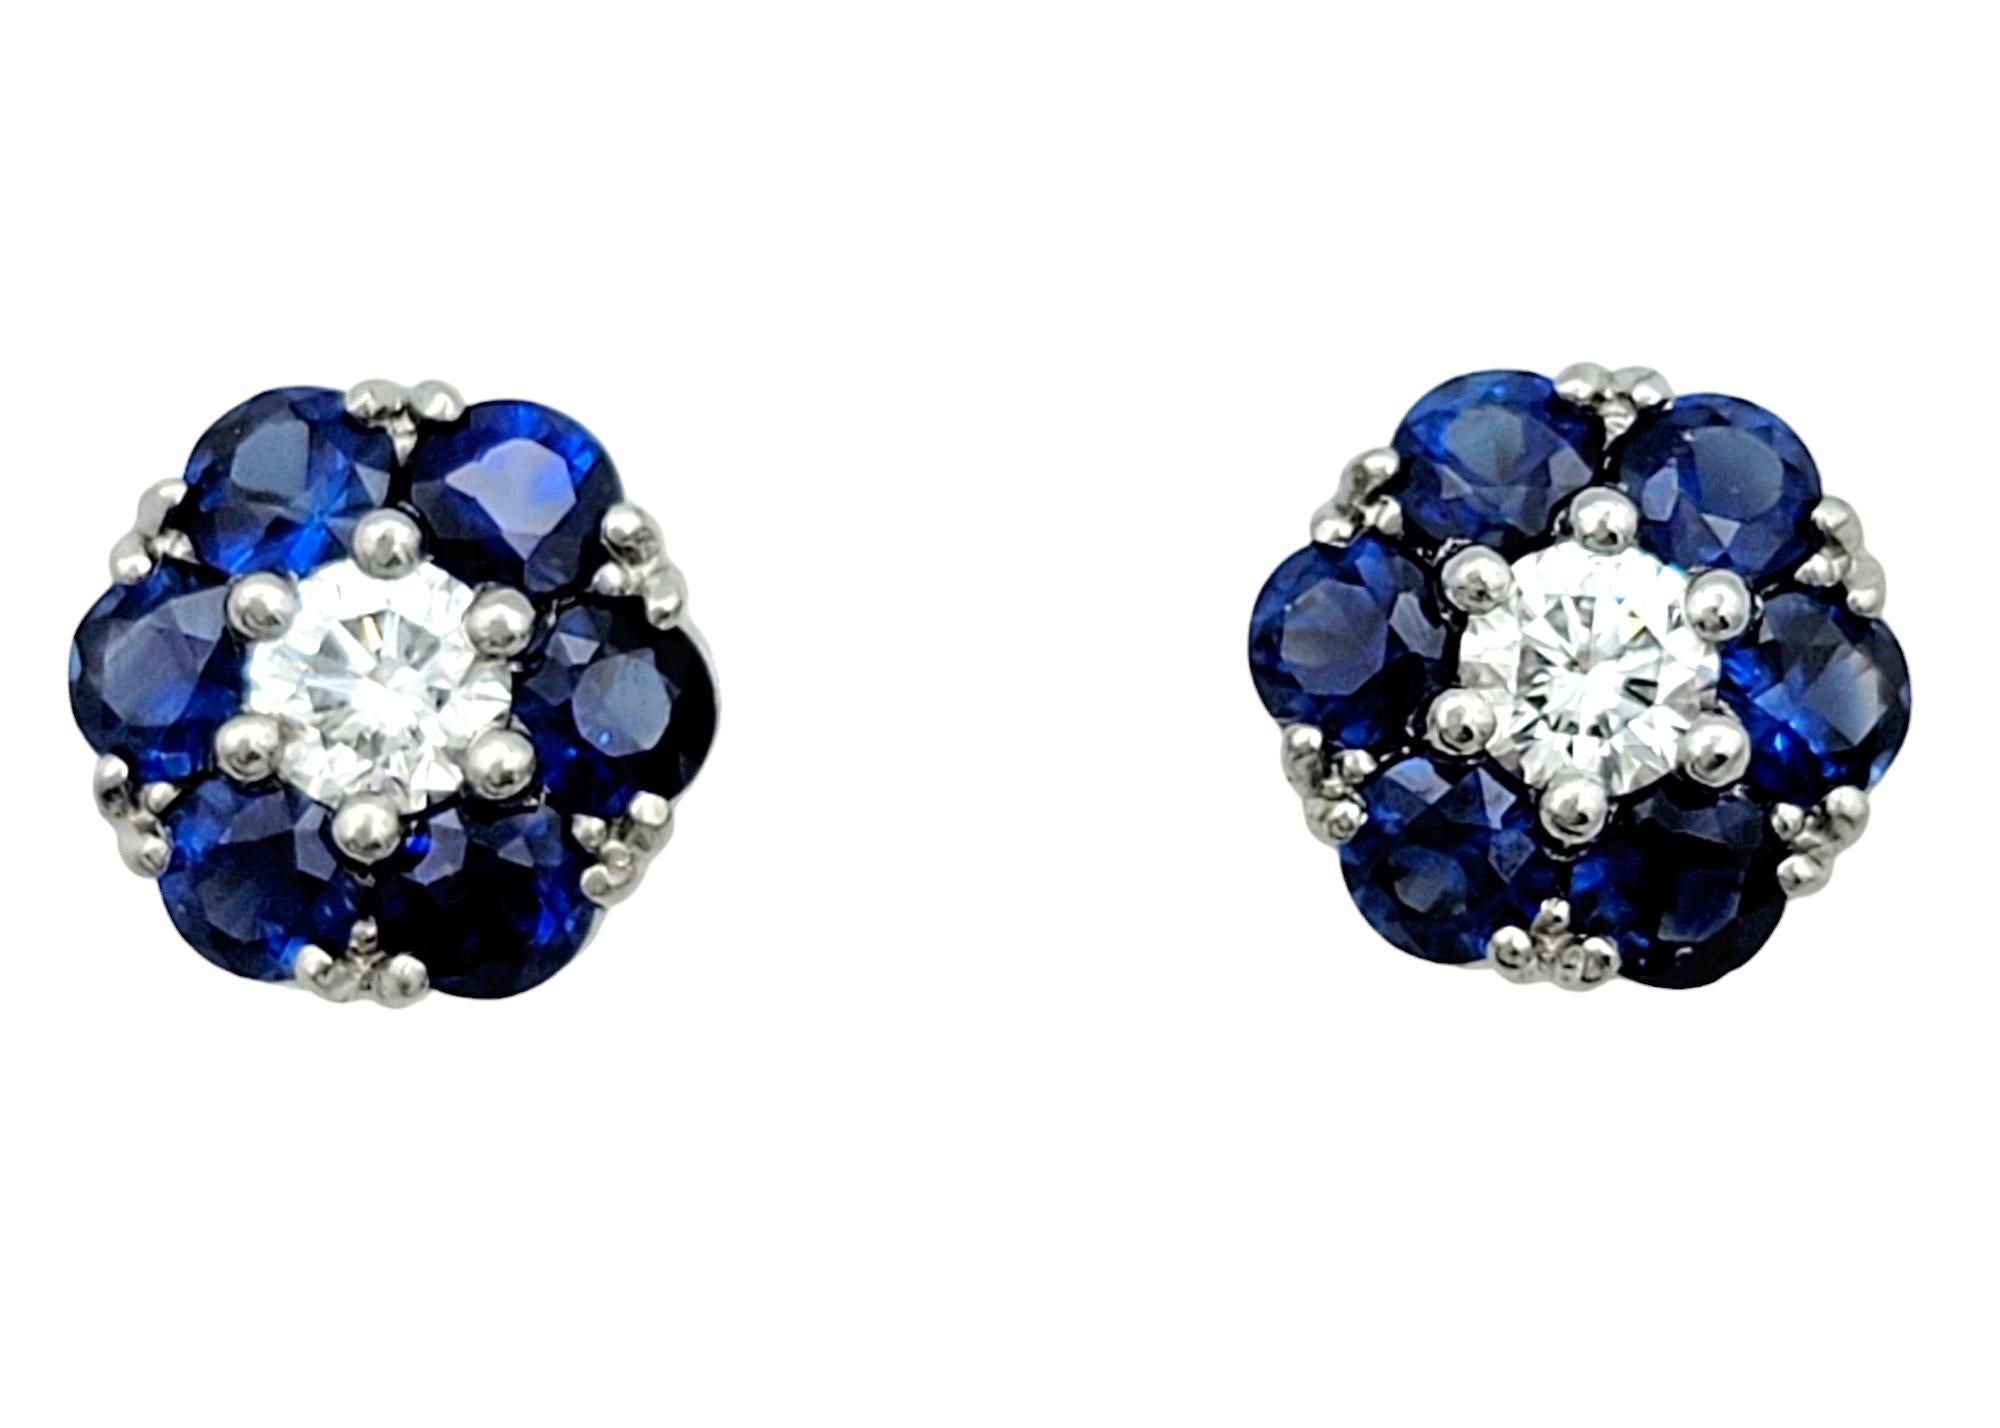 These charming Jabel stud earrings are a captivating display of floral beauty. Crafted from exquisite 18 karat yellow gold, each earring features a delicate flower motif adorned with vibrant sapphires and sparkling diamonds. The center of each